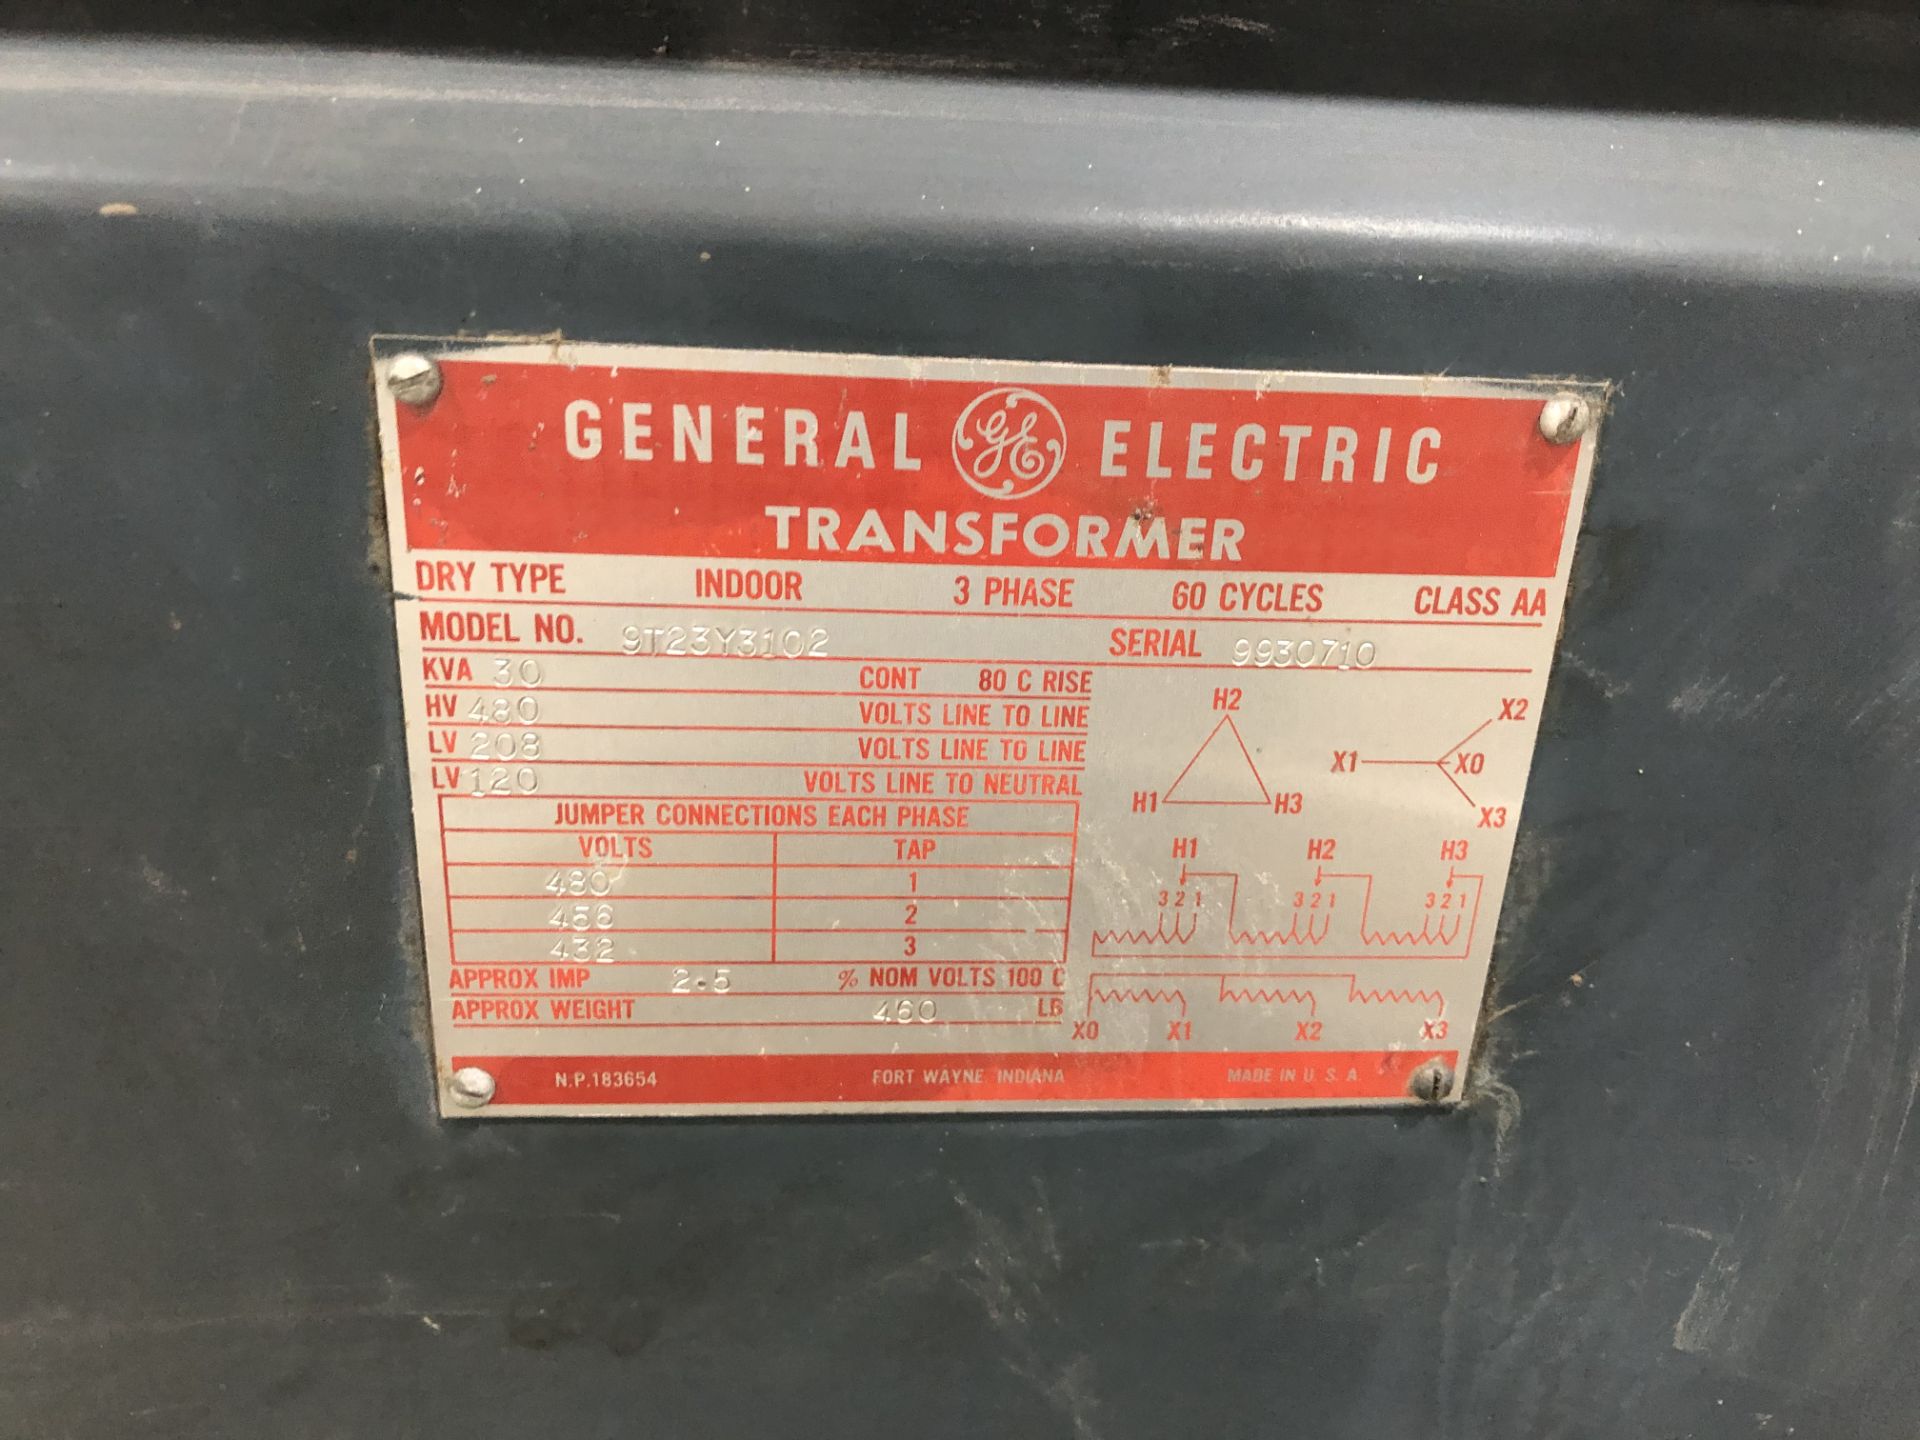 General Eletric Transformer, Model# 9T23Y3102, Serial# 9930710, 480 HV, 120 LV, 3 Phase, 60 Cycles - Image 2 of 3